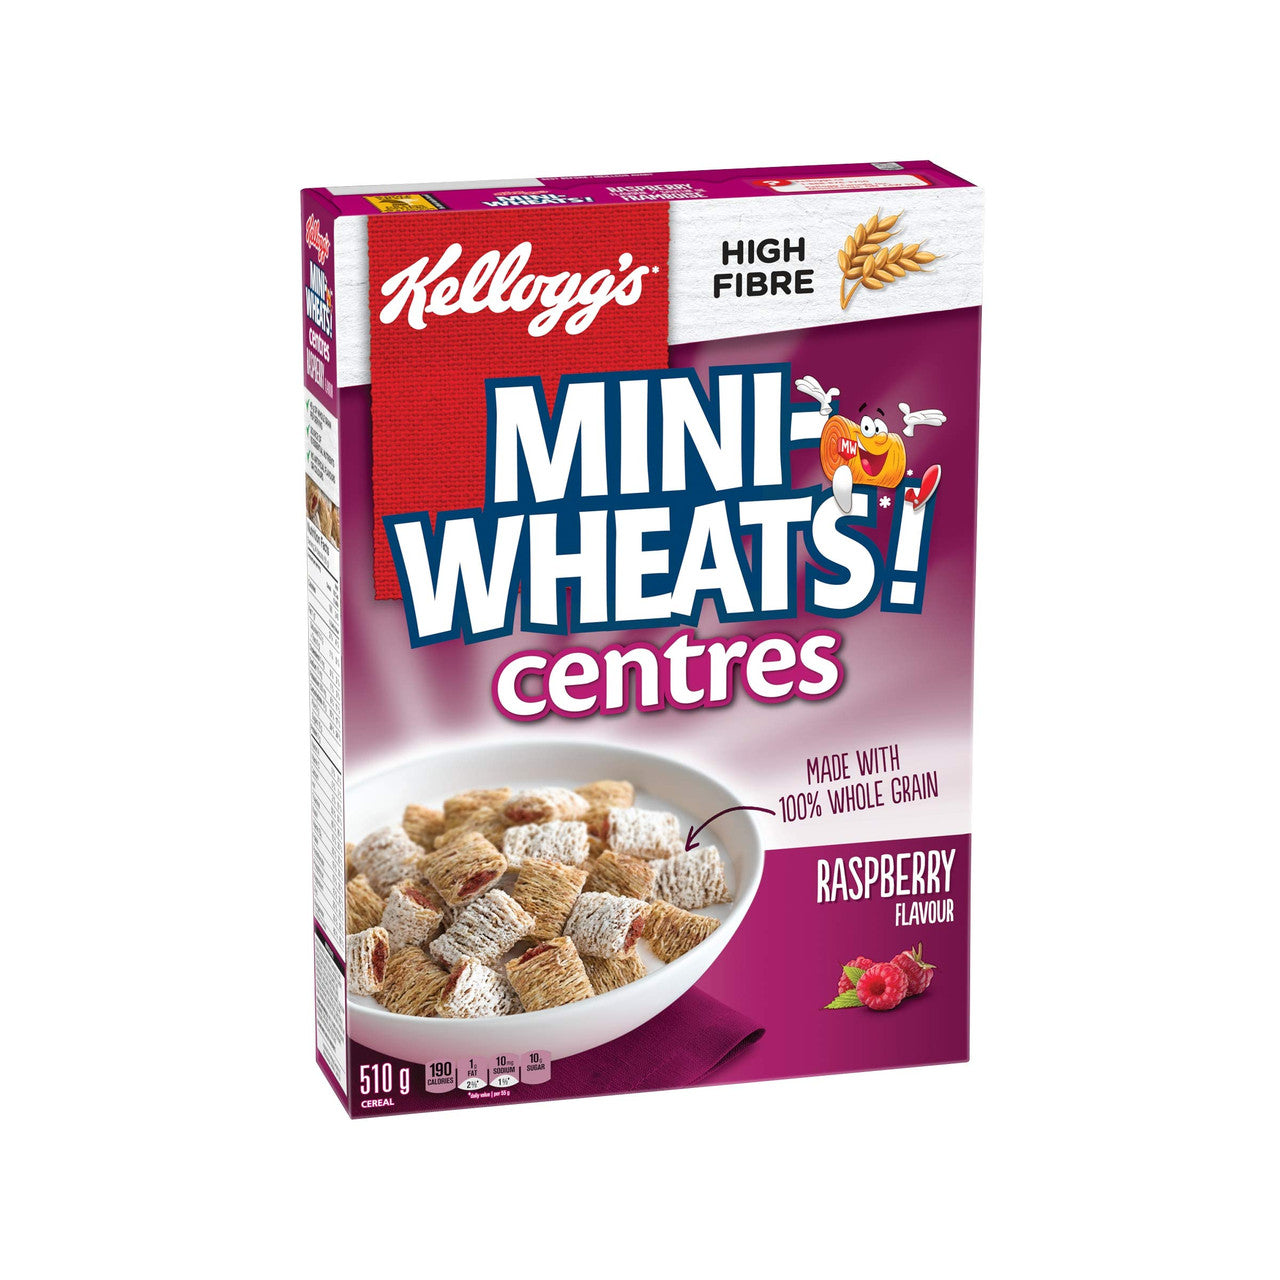 Kellogg's Mini-Wheats Centres Raspberry Flavour Cereal 510g/18oz. (Imported from Canada)